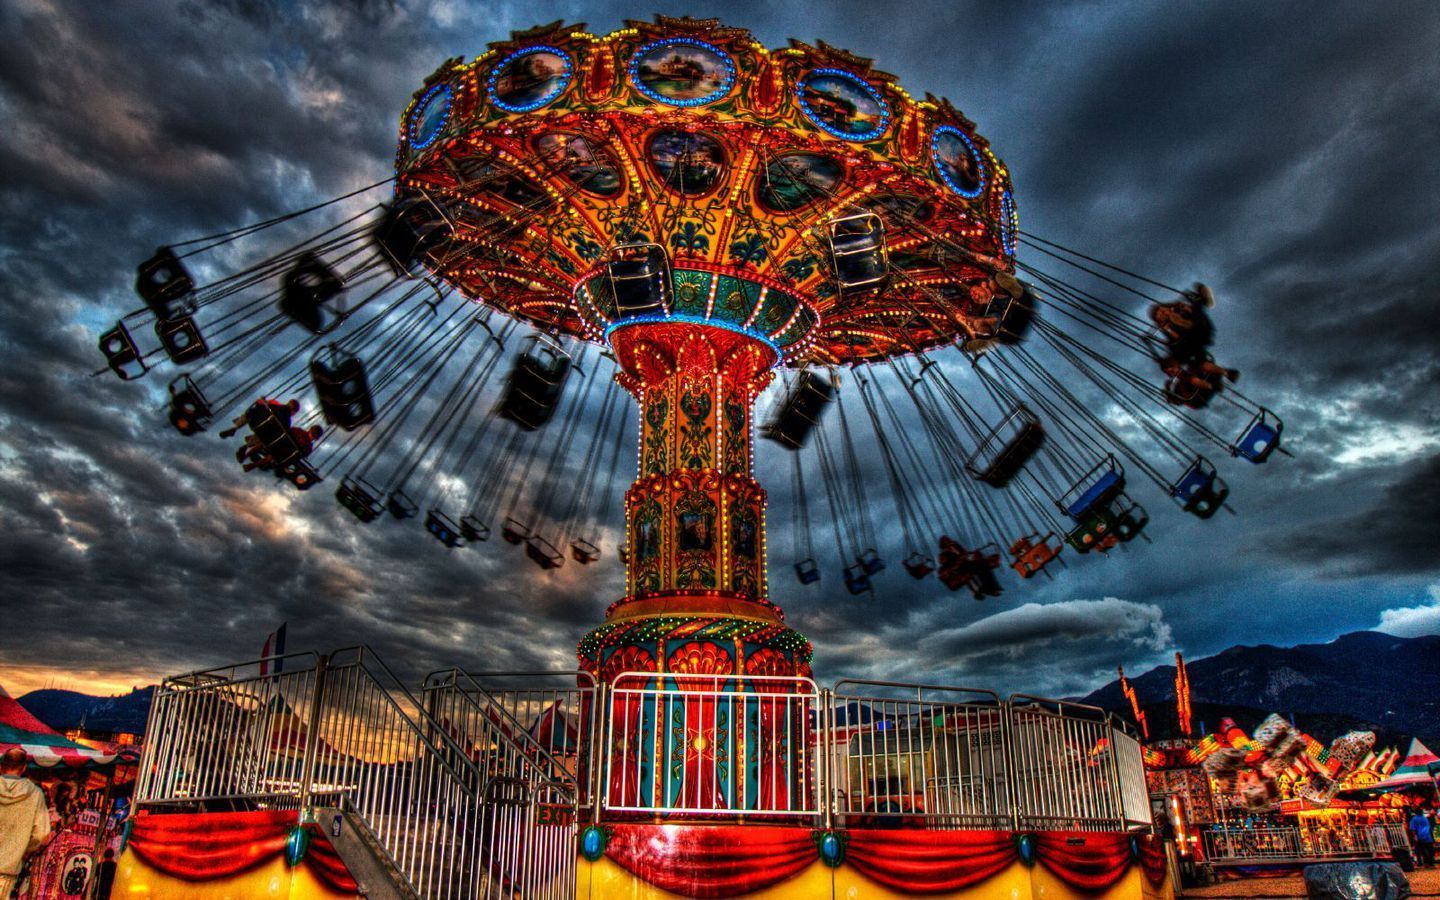 Going To The Carnival - Circus And Carnivals Wallpaper (20358670) - Fanpop